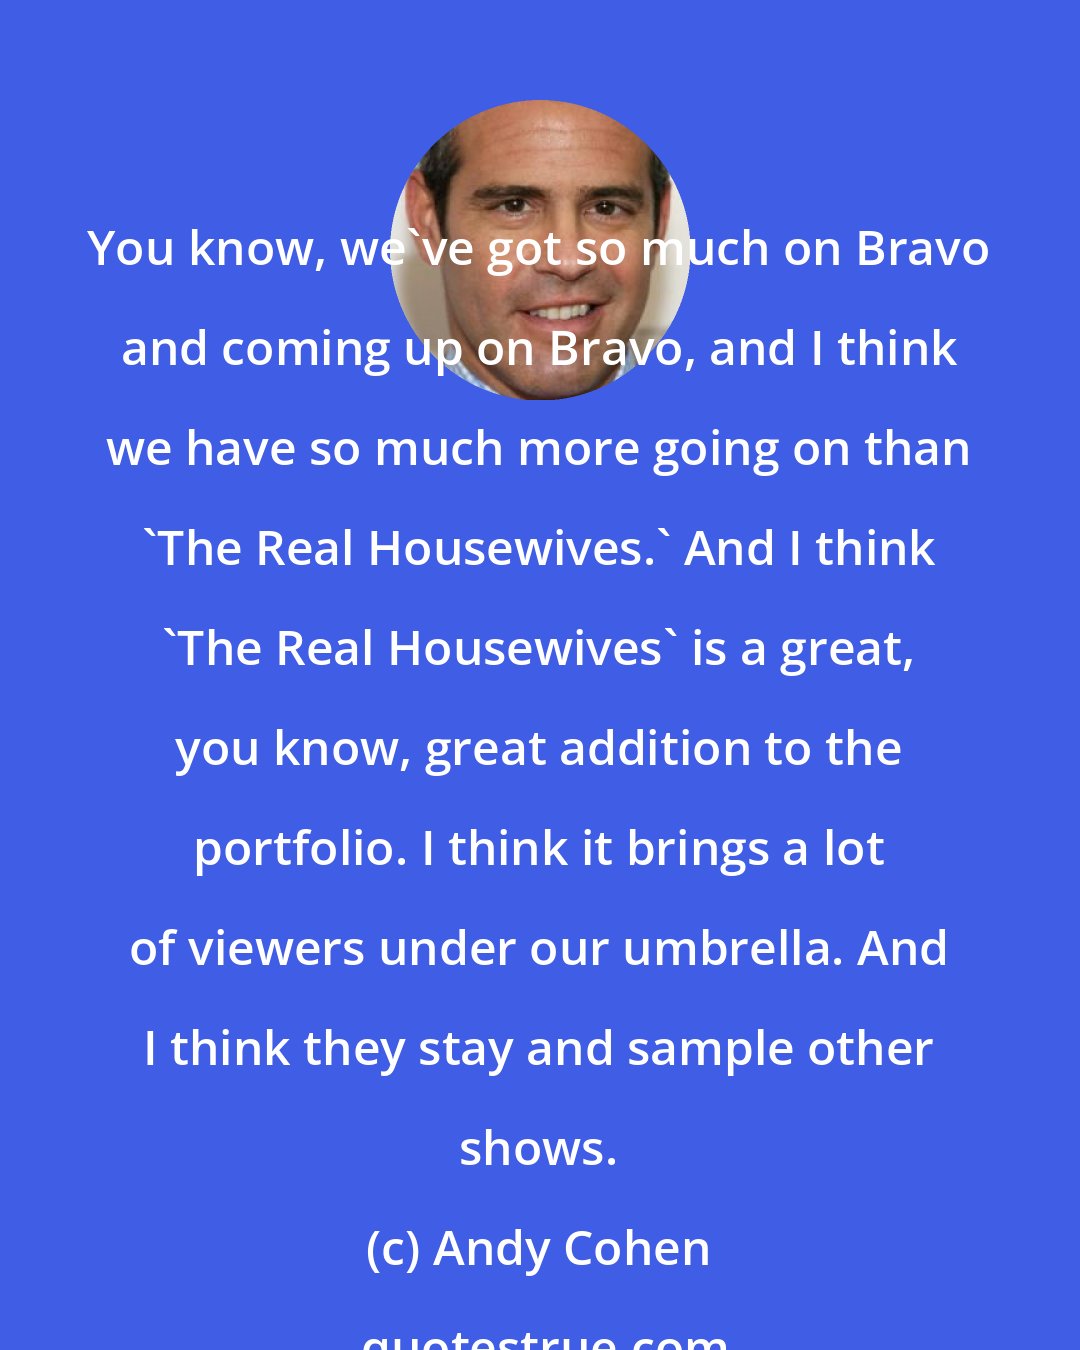 Andy Cohen: You know, we've got so much on Bravo and coming up on Bravo, and I think we have so much more going on than 'The Real Housewives.' And I think 'The Real Housewives' is a great, you know, great addition to the portfolio. I think it brings a lot of viewers under our umbrella. And I think they stay and sample other shows.